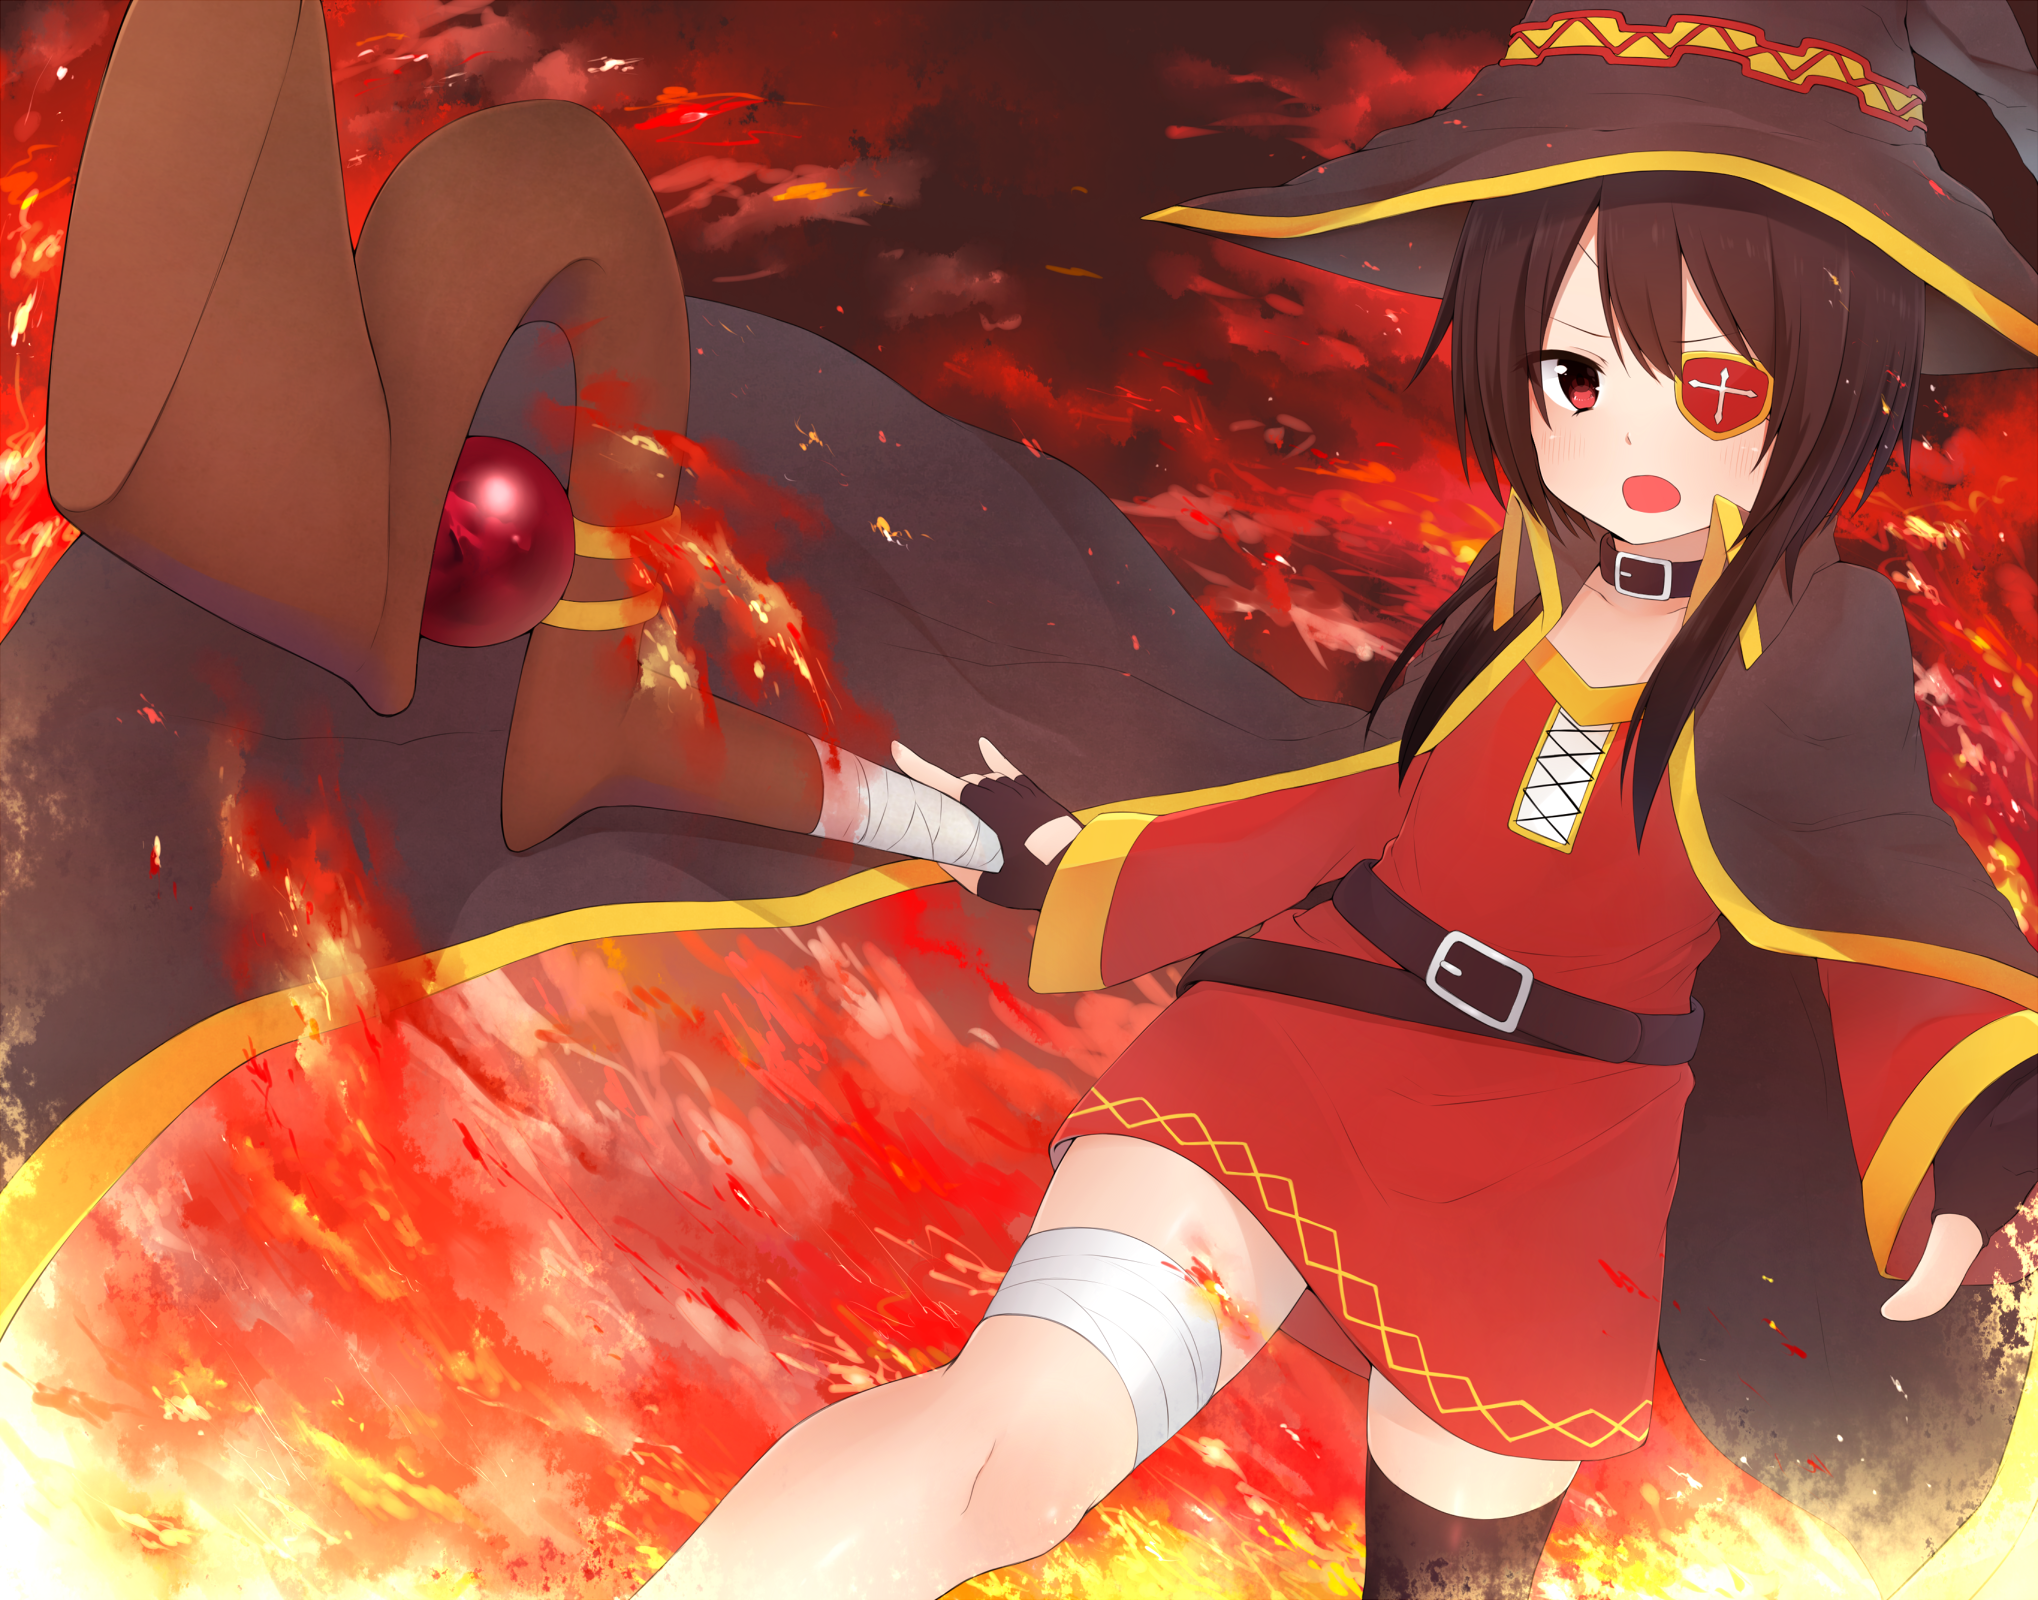 Megumin by 星宮あき